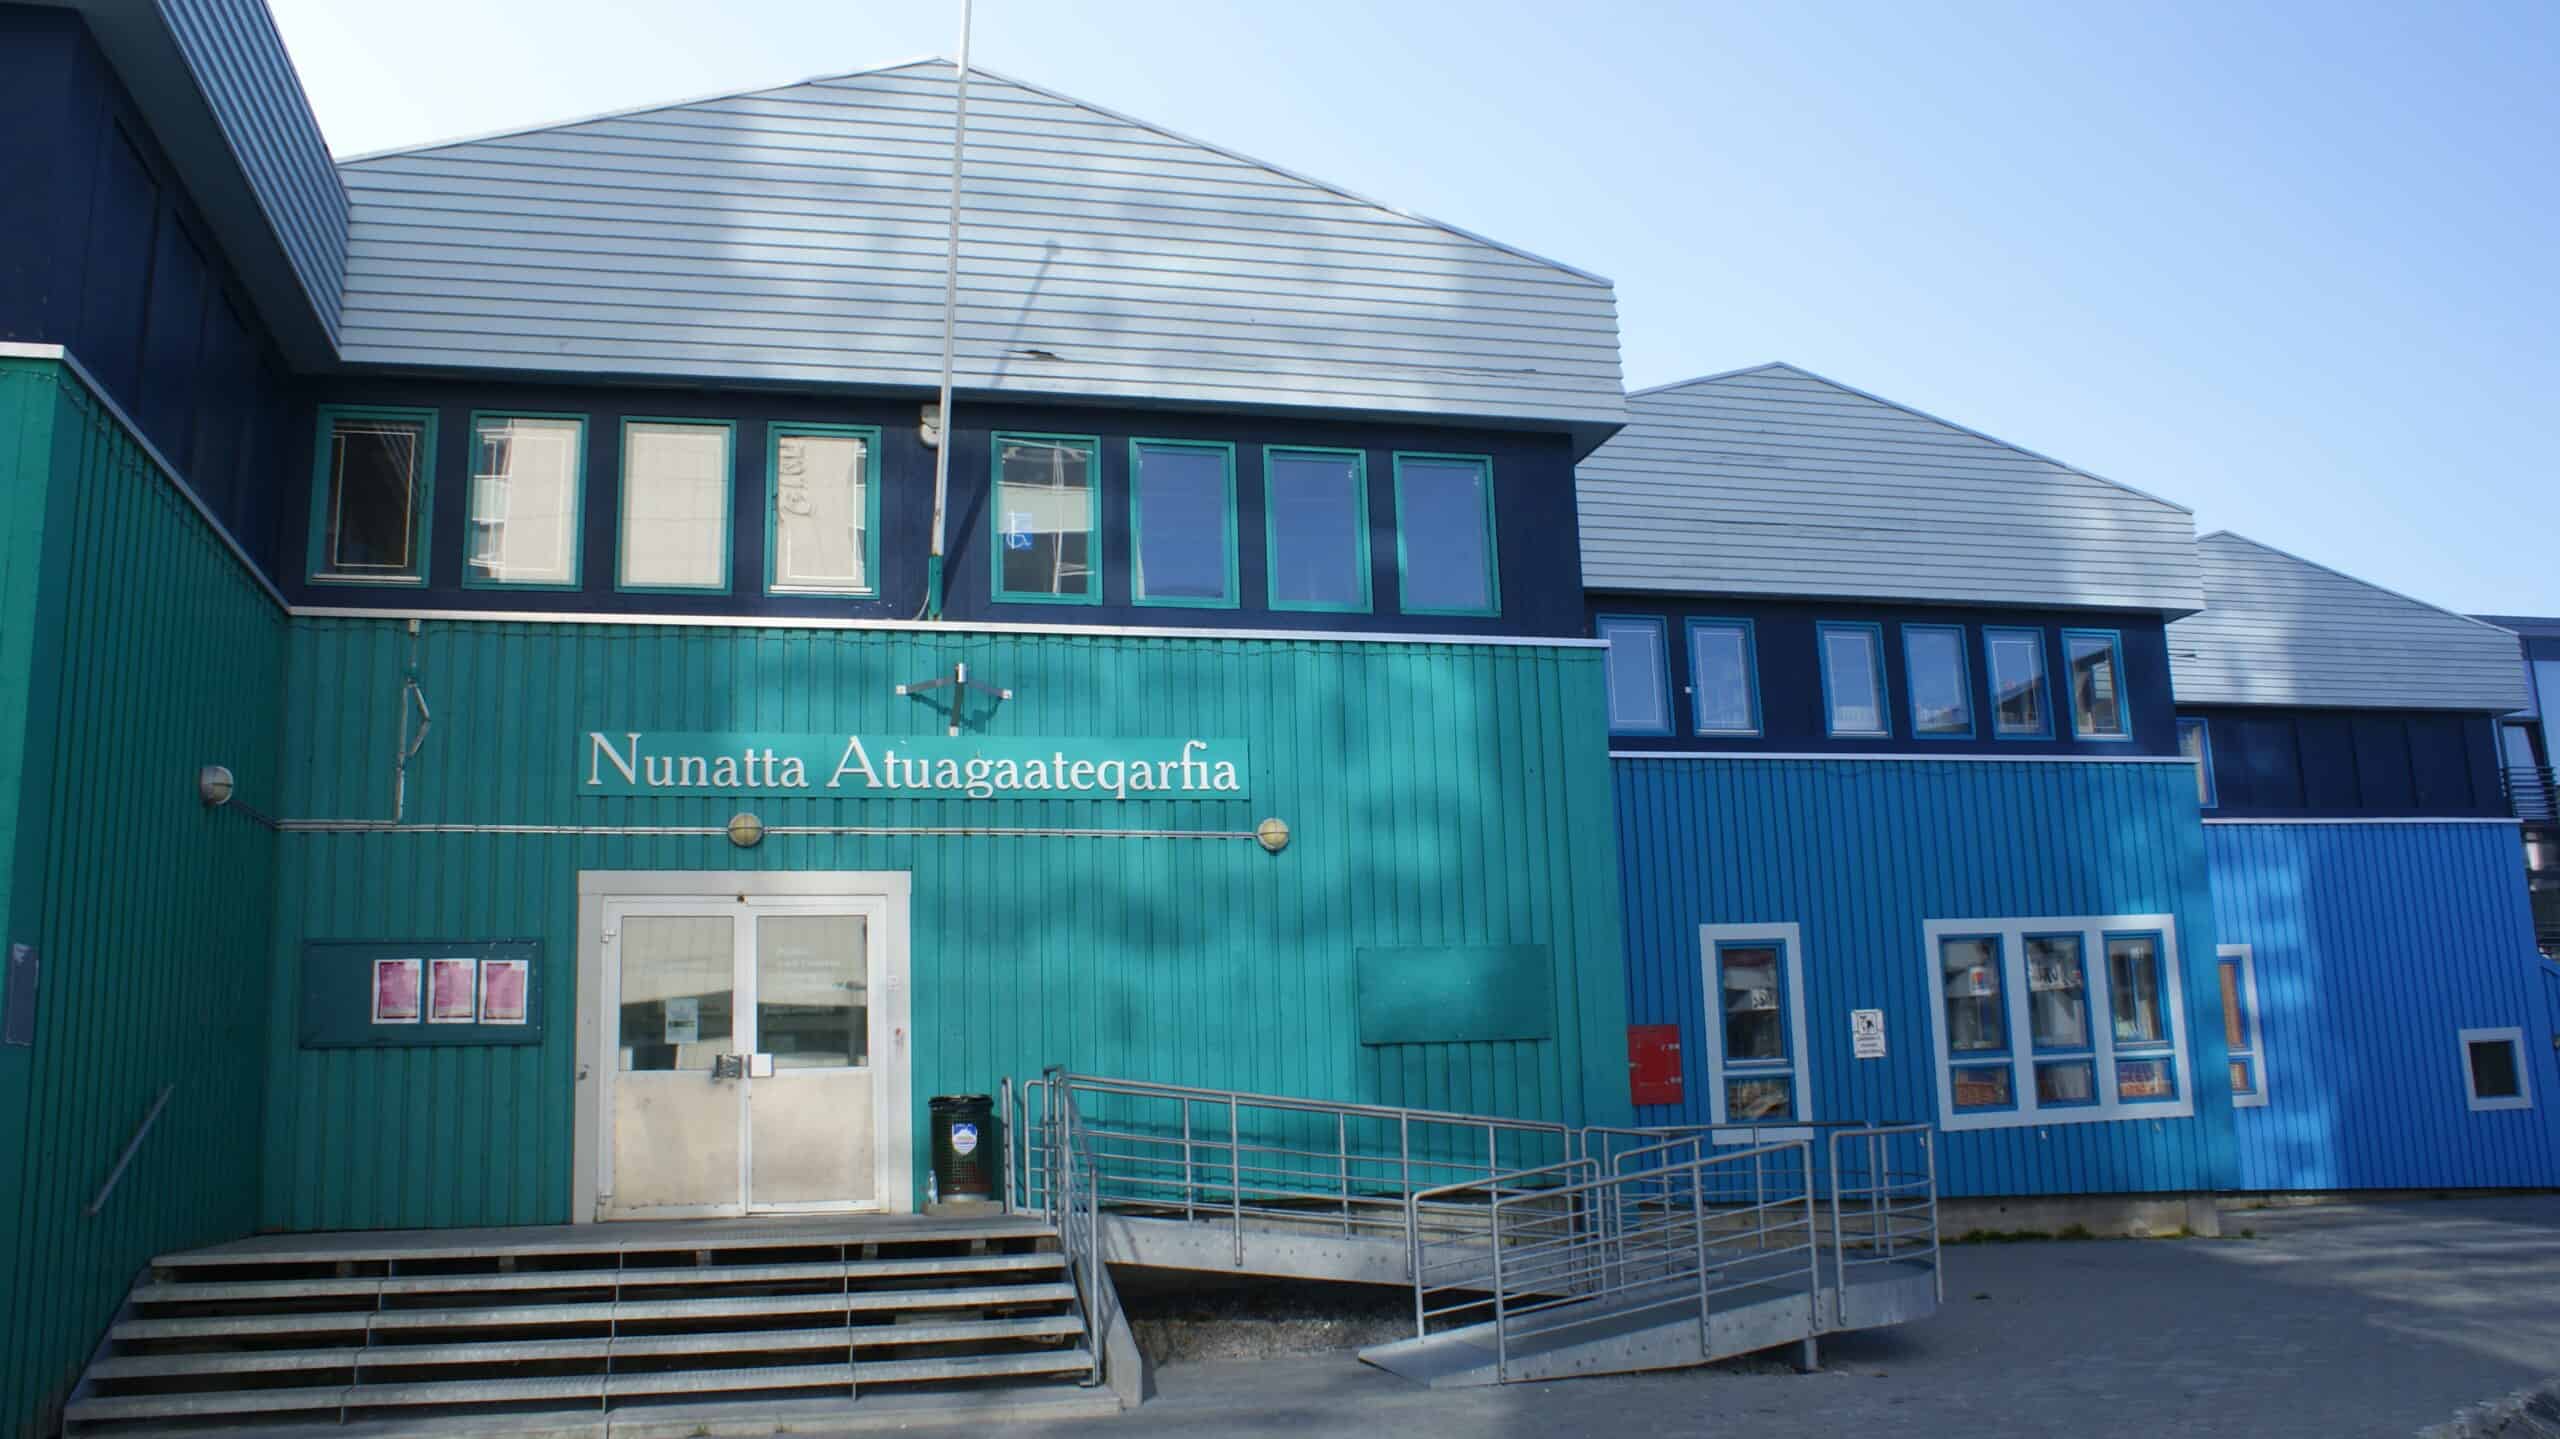 National library of Greenland - Public and National Library of Greenland